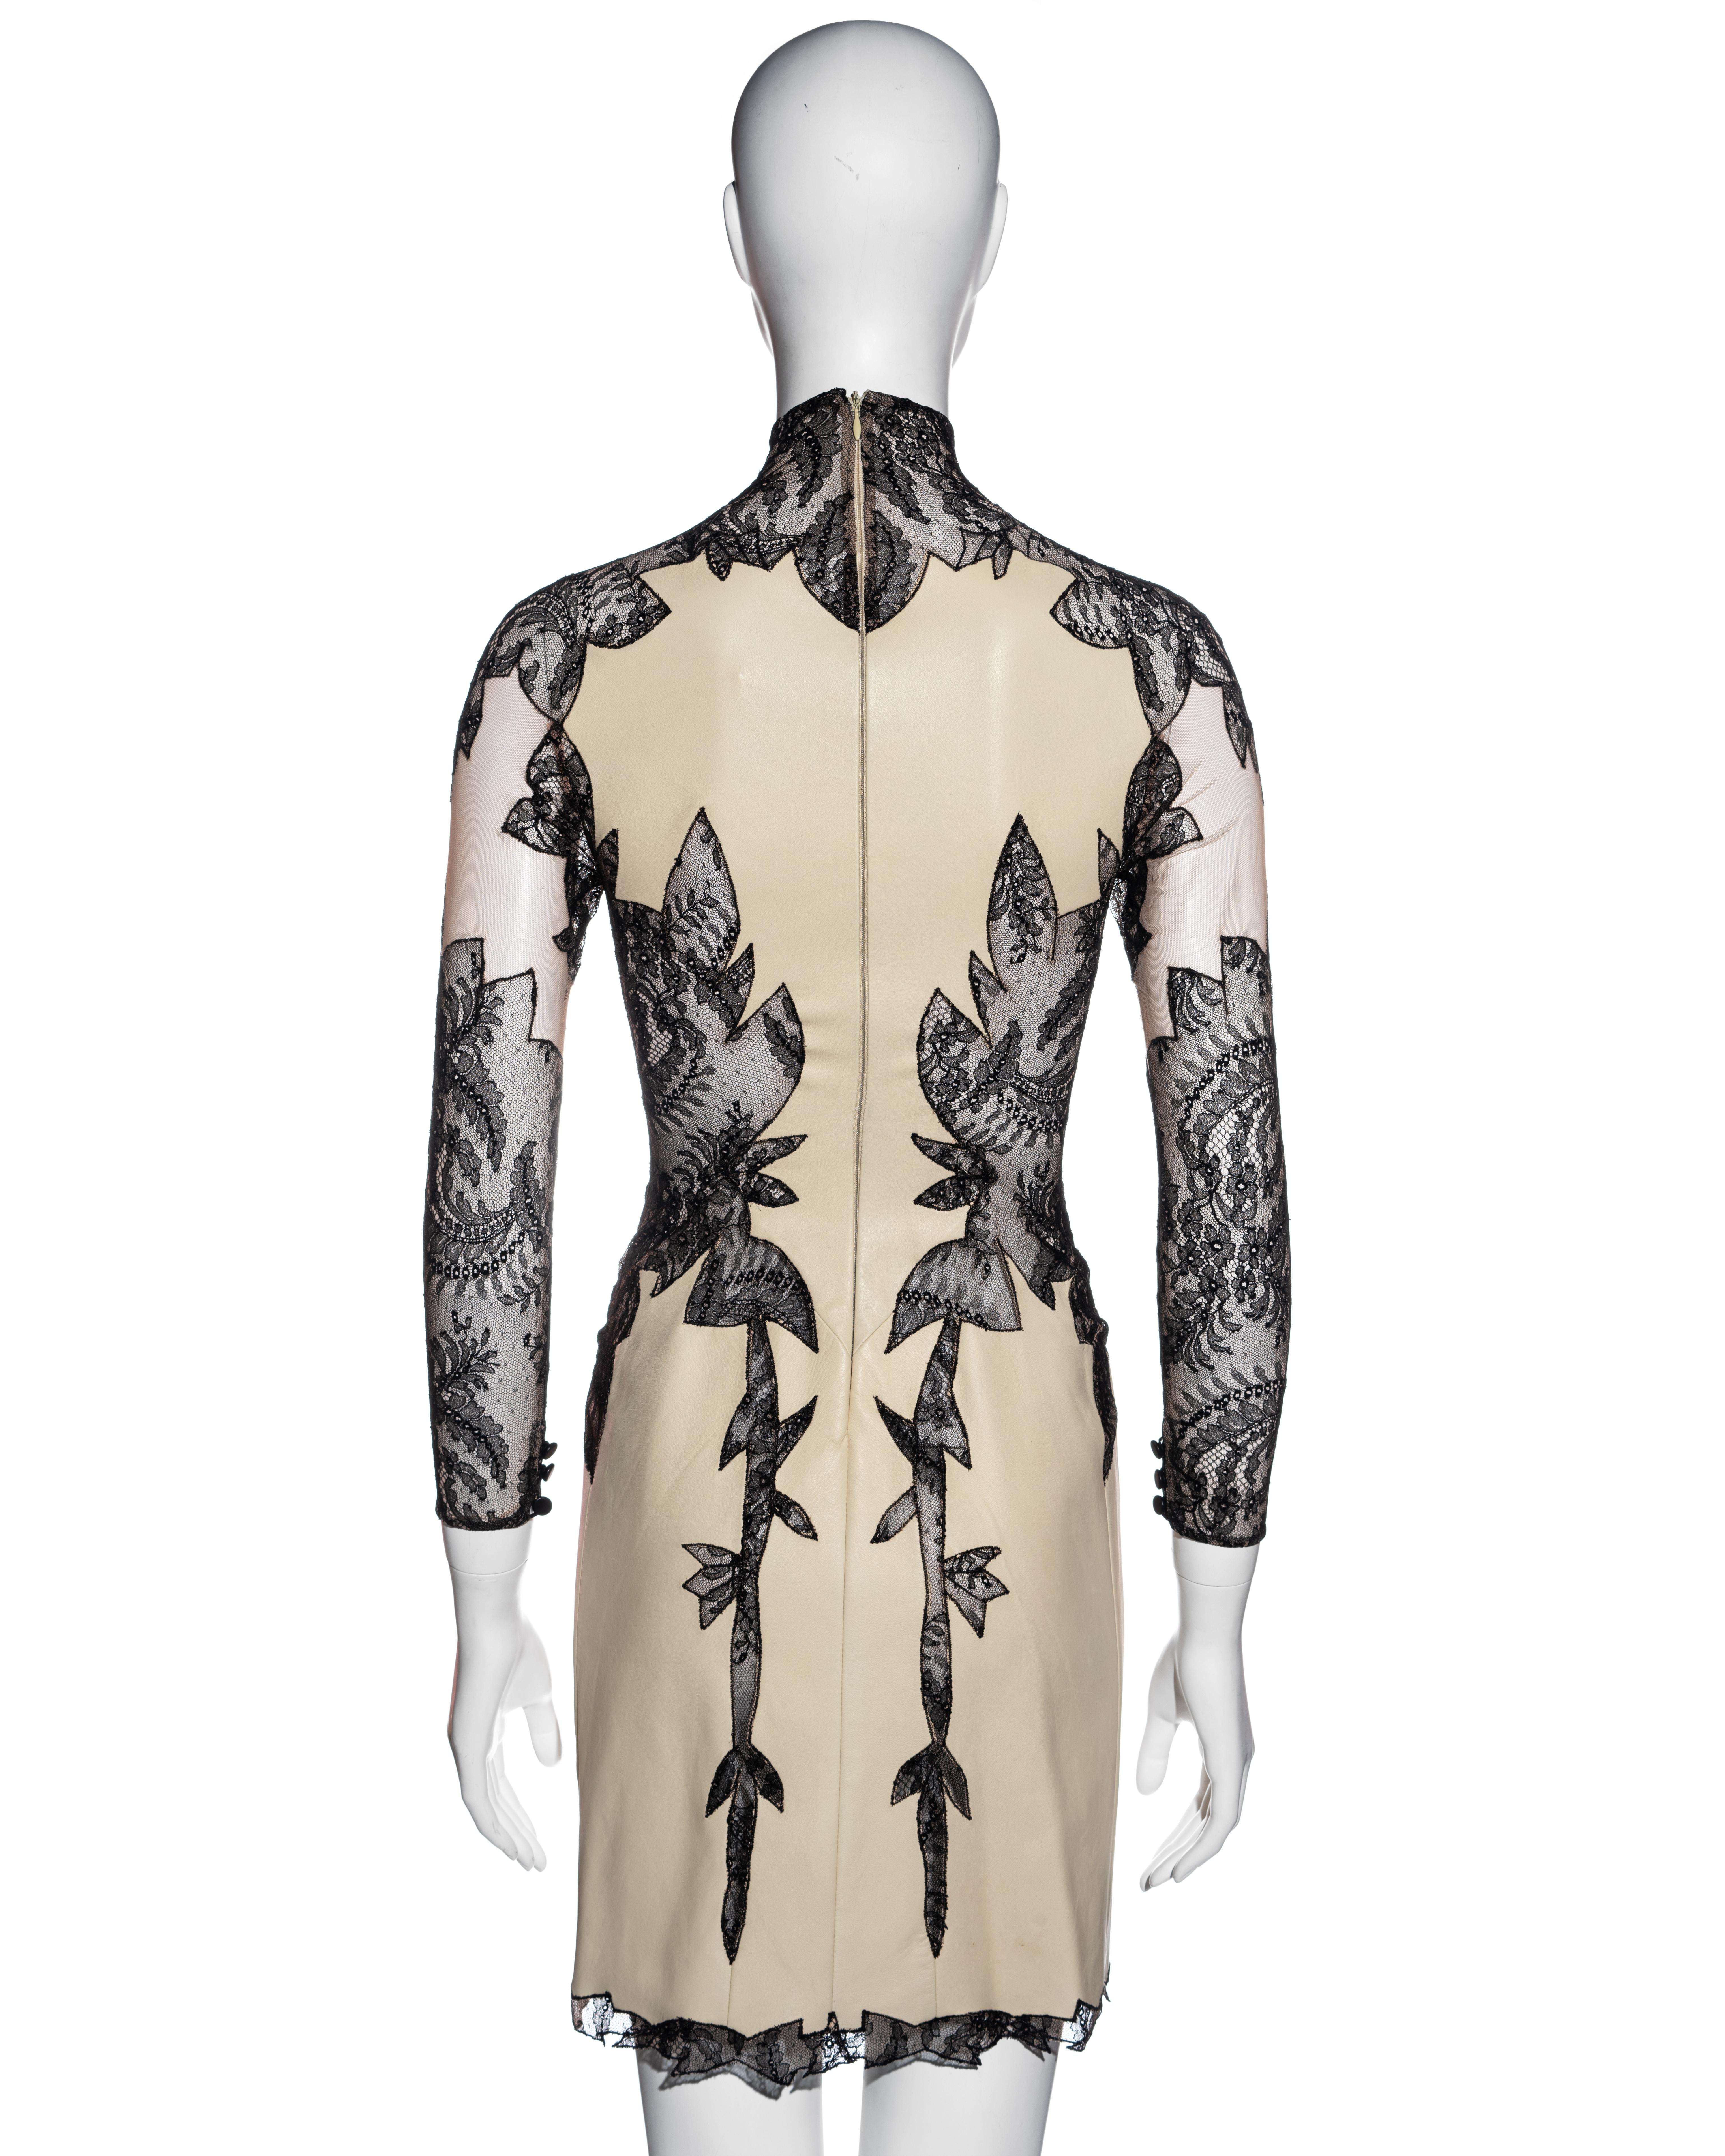 Gianni Versace cream leather and black lace evening dress, ss 2002 For Sale 1